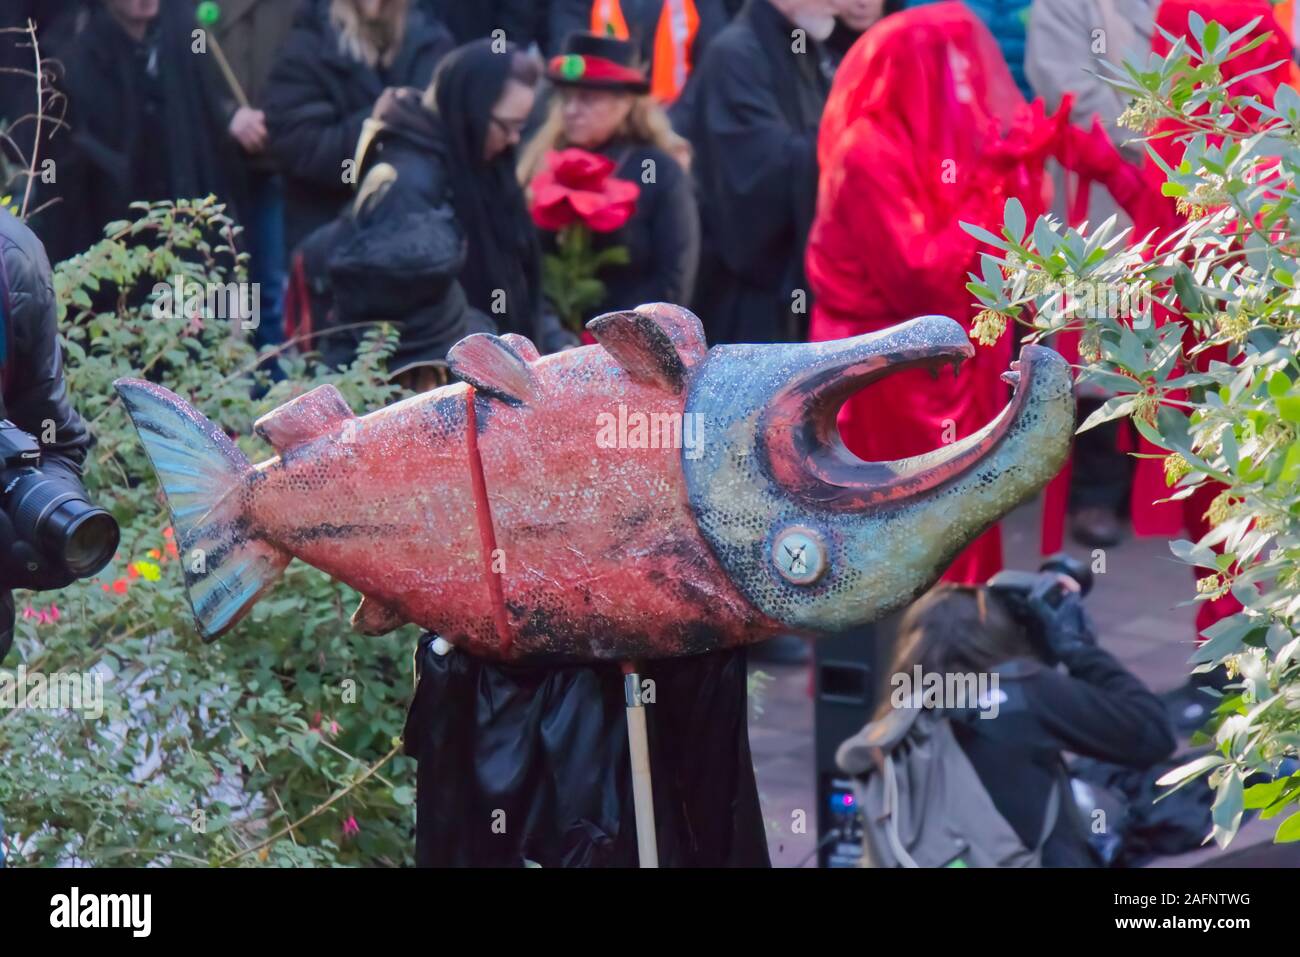 Vancouver, Canada - November 29,2019: View of dead Fish during Climate Strike near Burrard Station. Funeral for Extinction event. Stock Photo